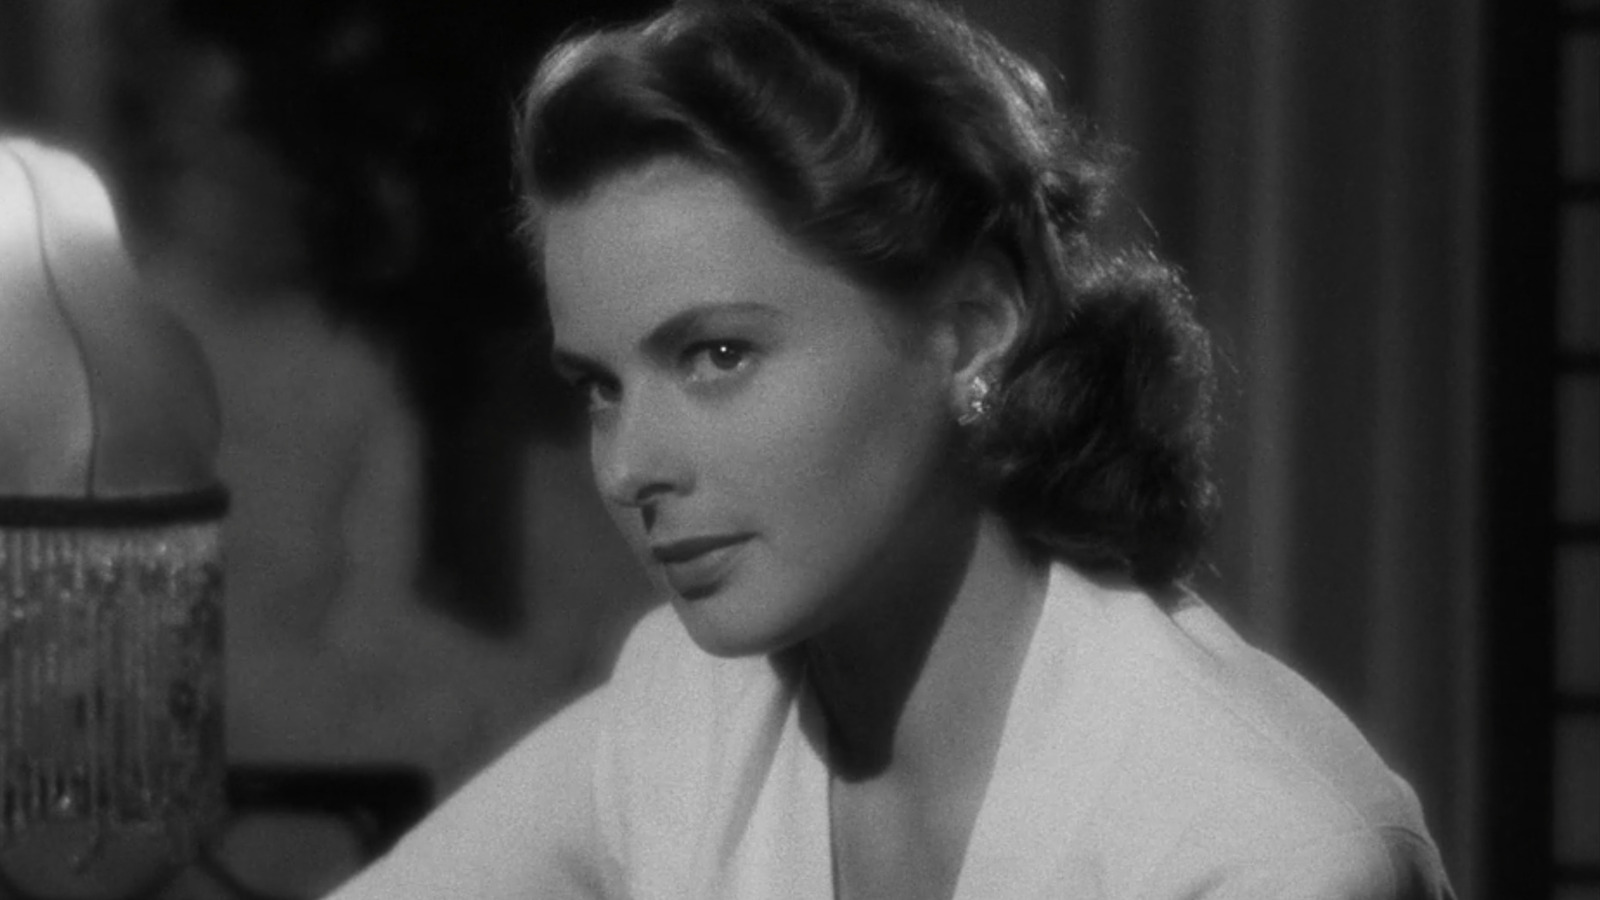 Ingrid Bergman had to test the waters before trusting the Hollywood system